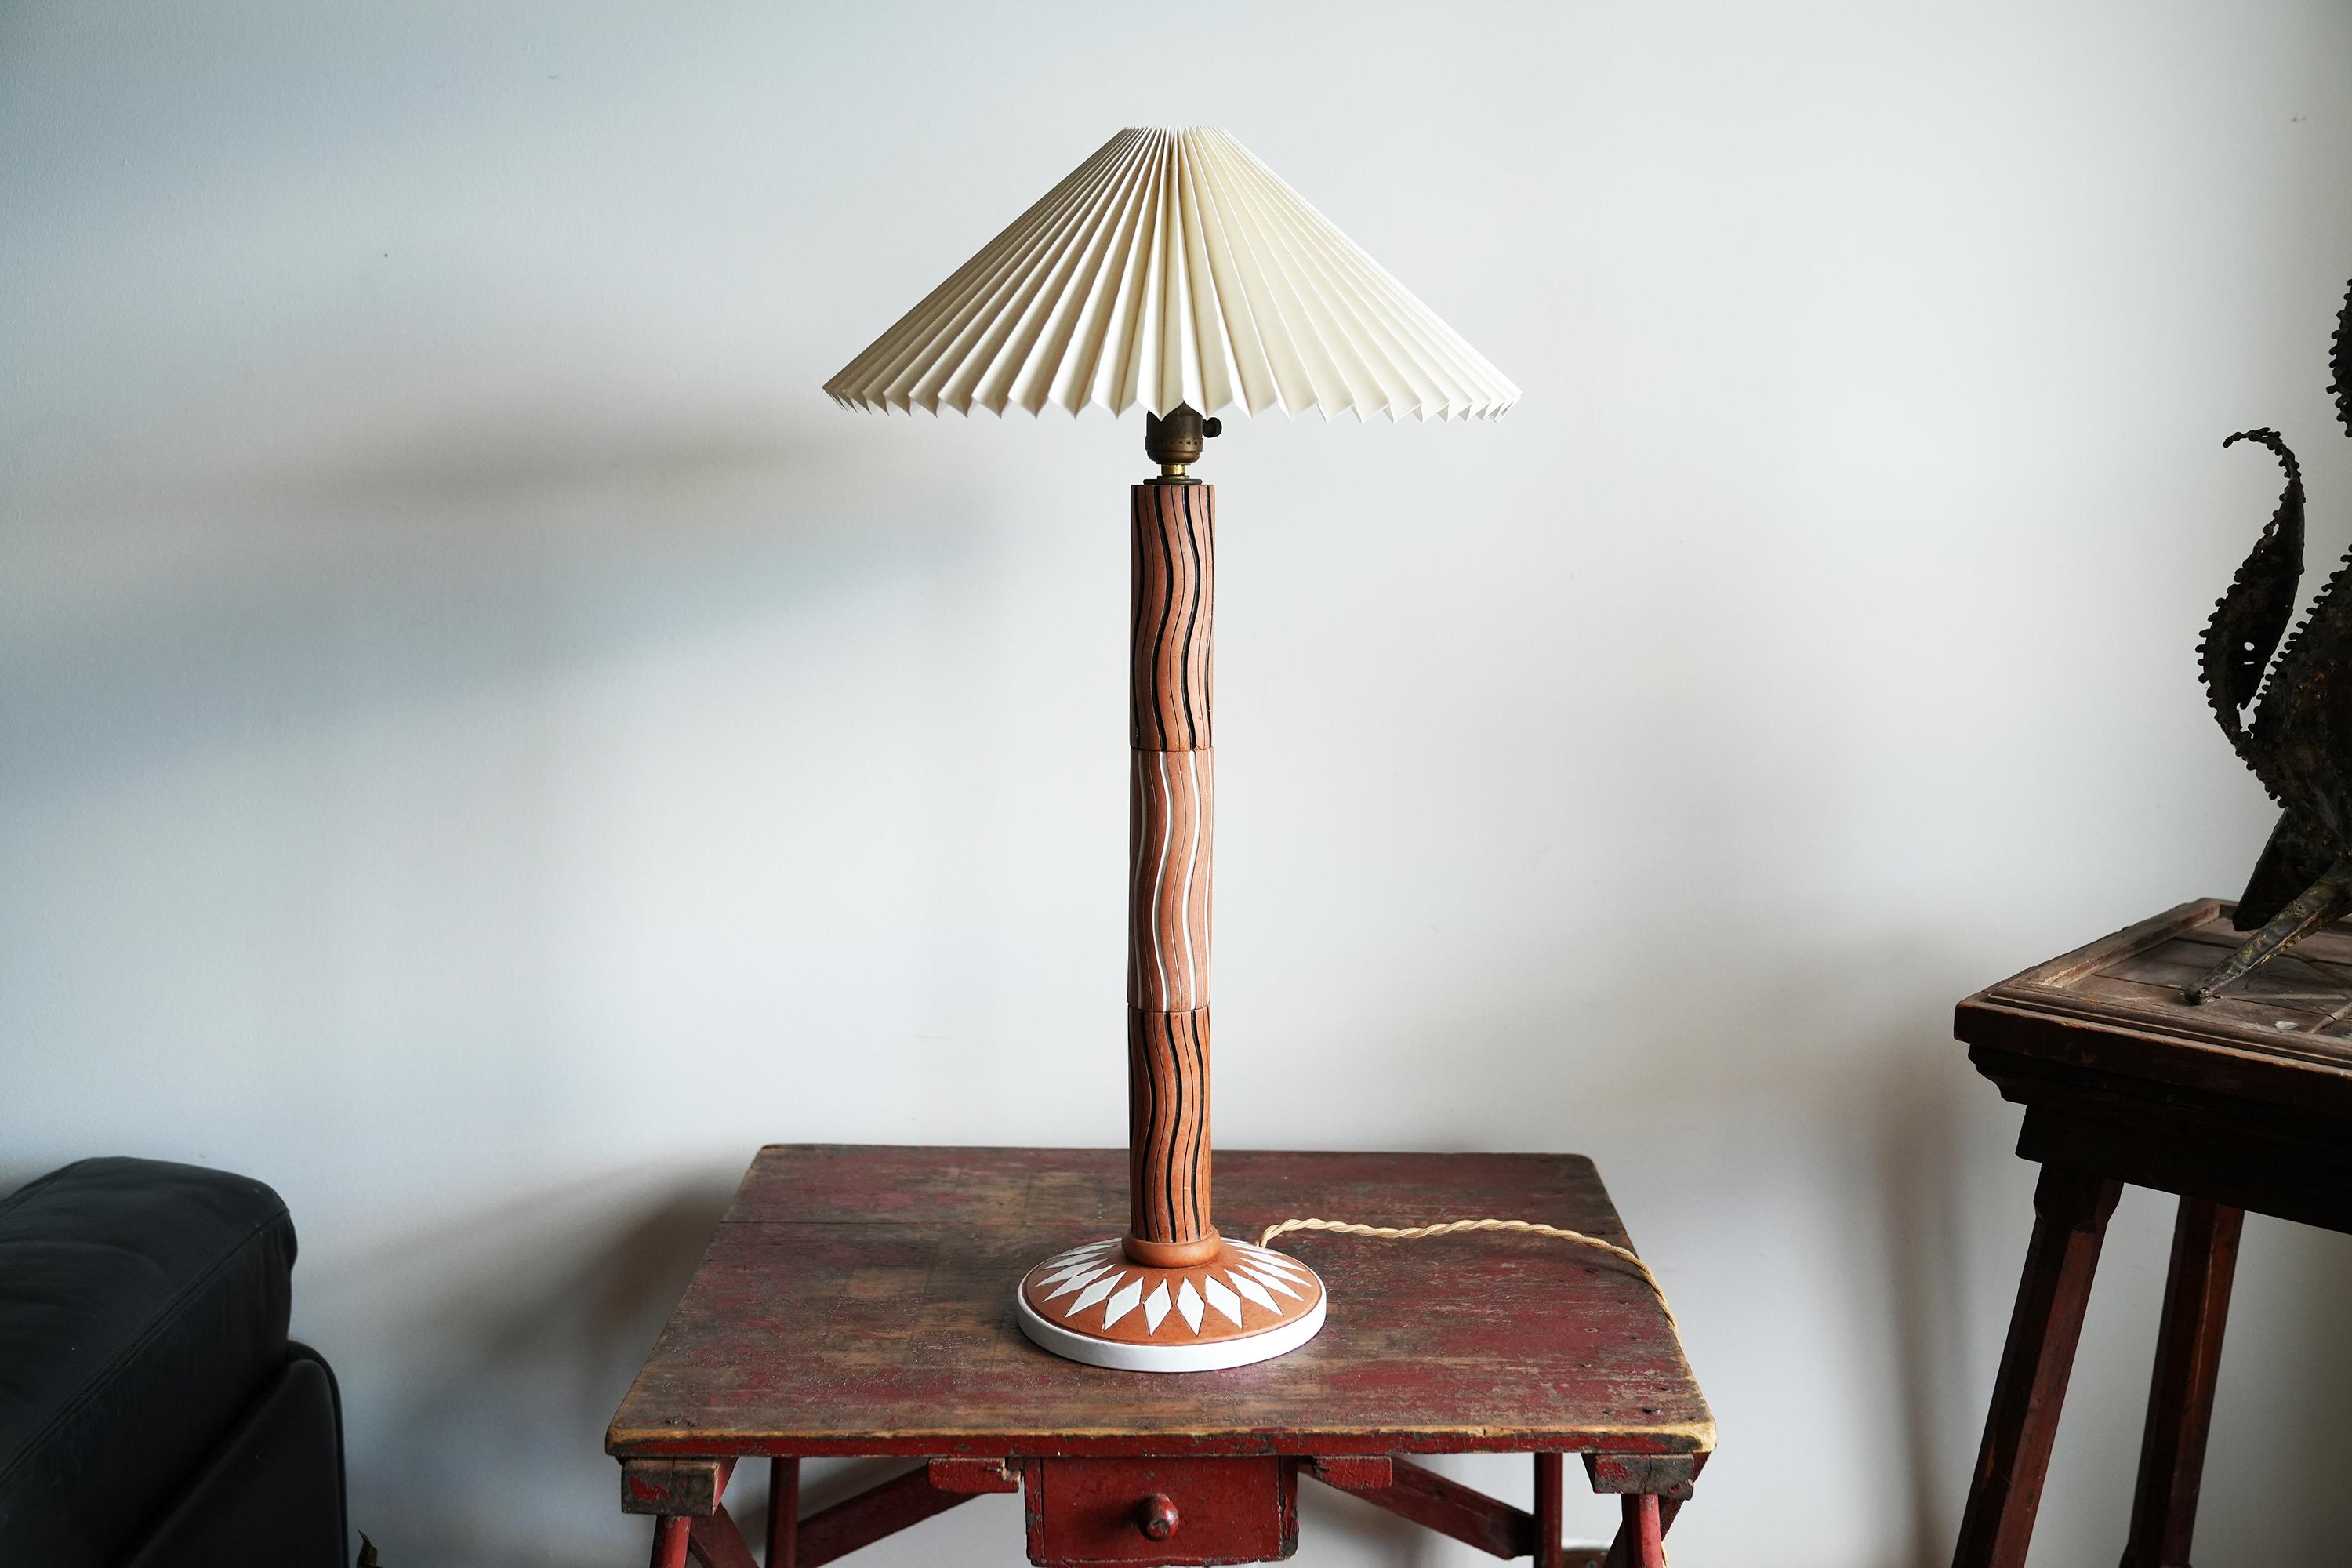 This is a graphic mid century Italian terracotta lamp with pleated shade. The body of the lamp is incised with alternating black and white waves with the base having a white glazed foot and diamond pattern. Signed on underside 'Beth Weissman,